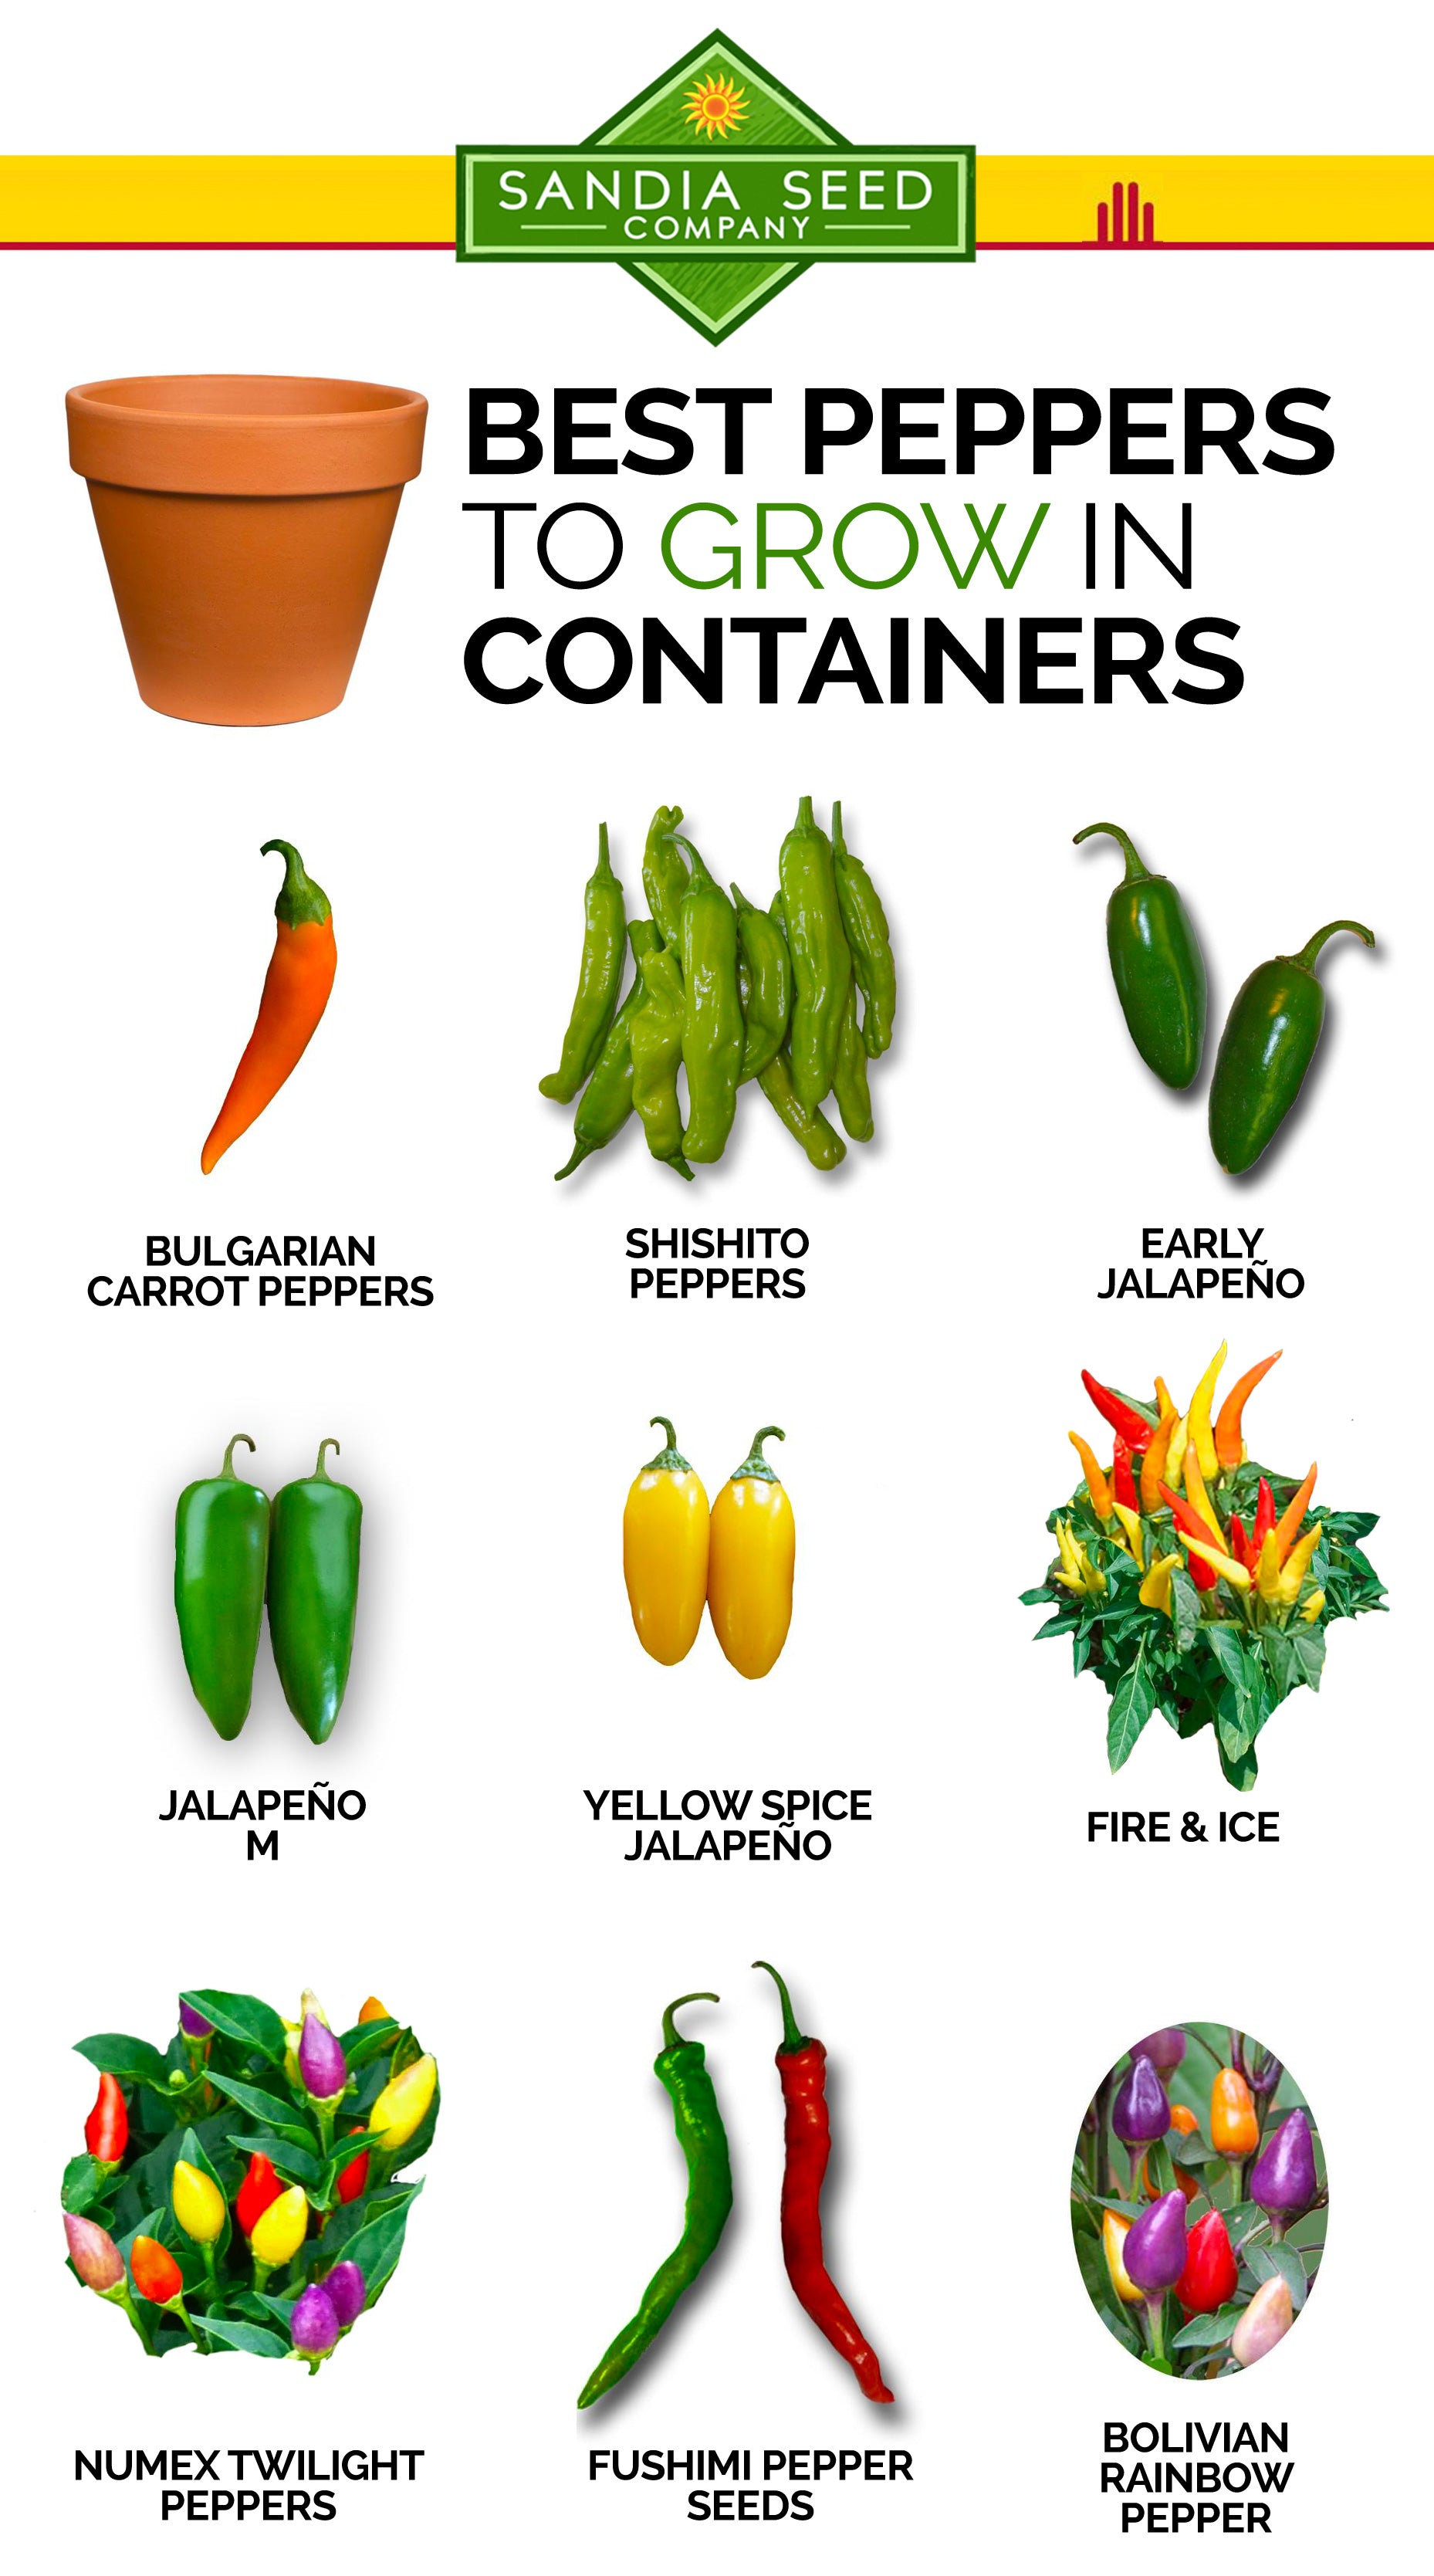 6 Creative Ways to Use Lots of Peppers